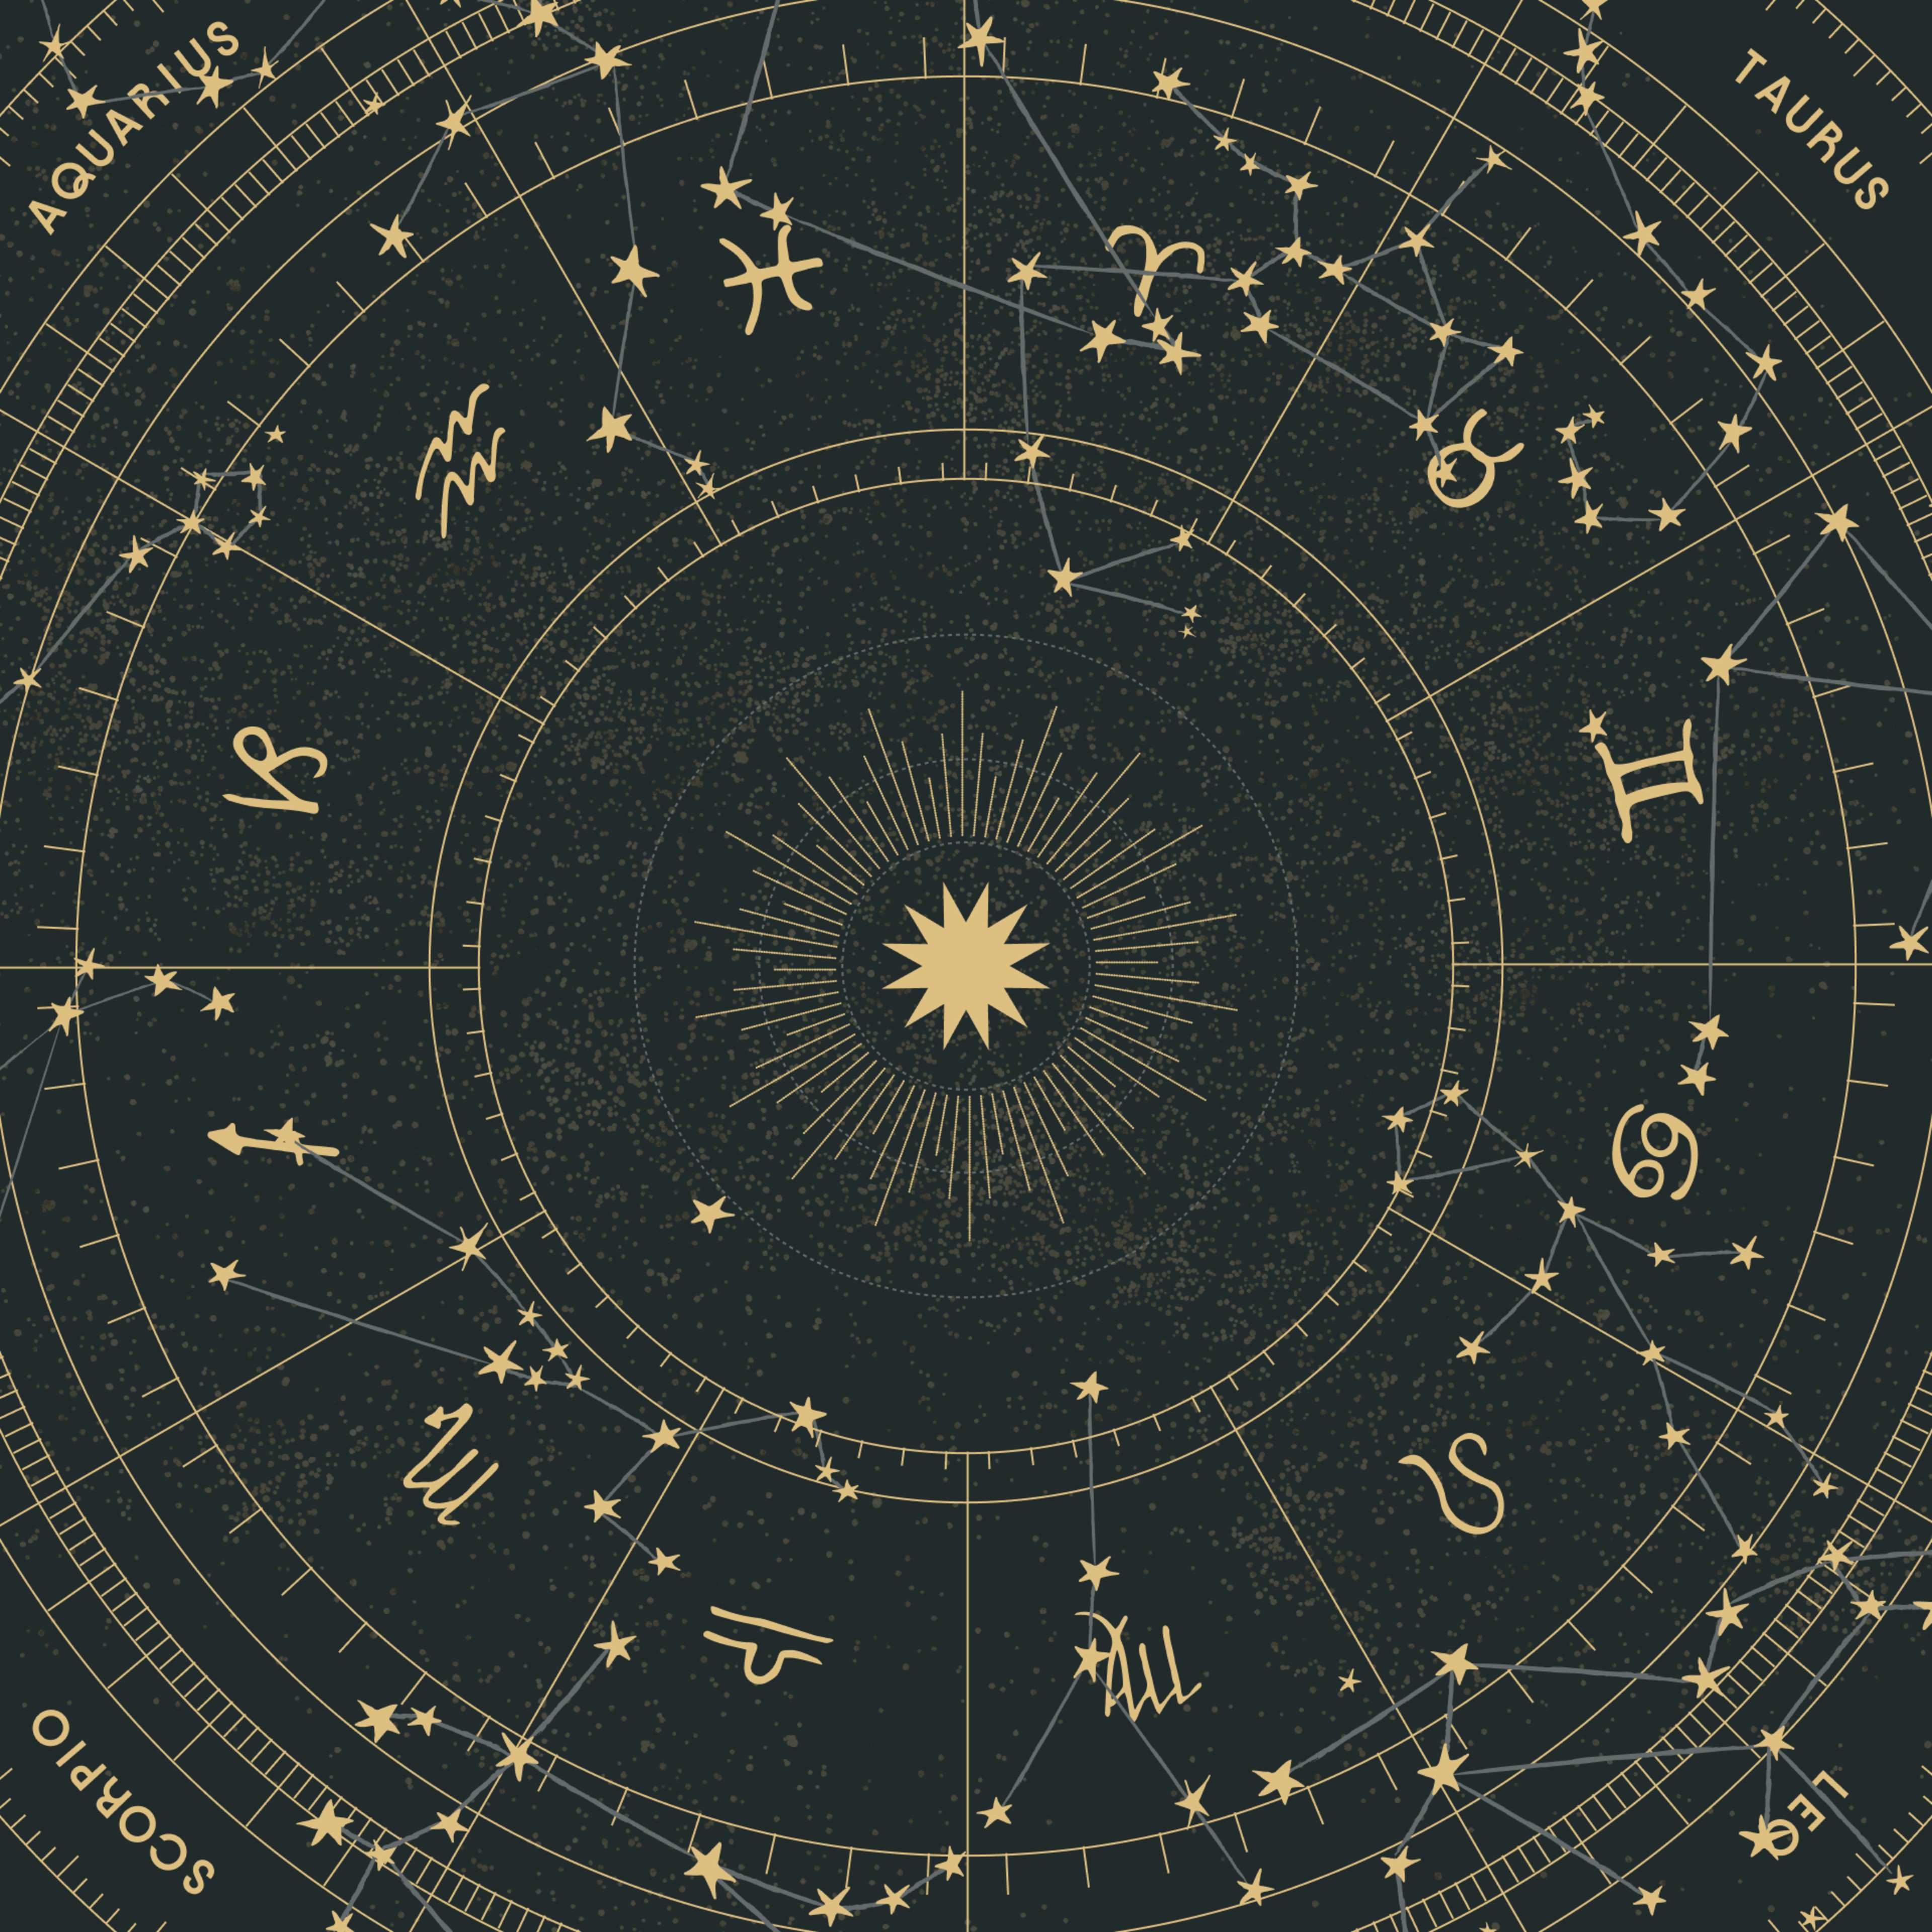 Astrology 101: Zodiac Signs, Houses, Elements, Planets